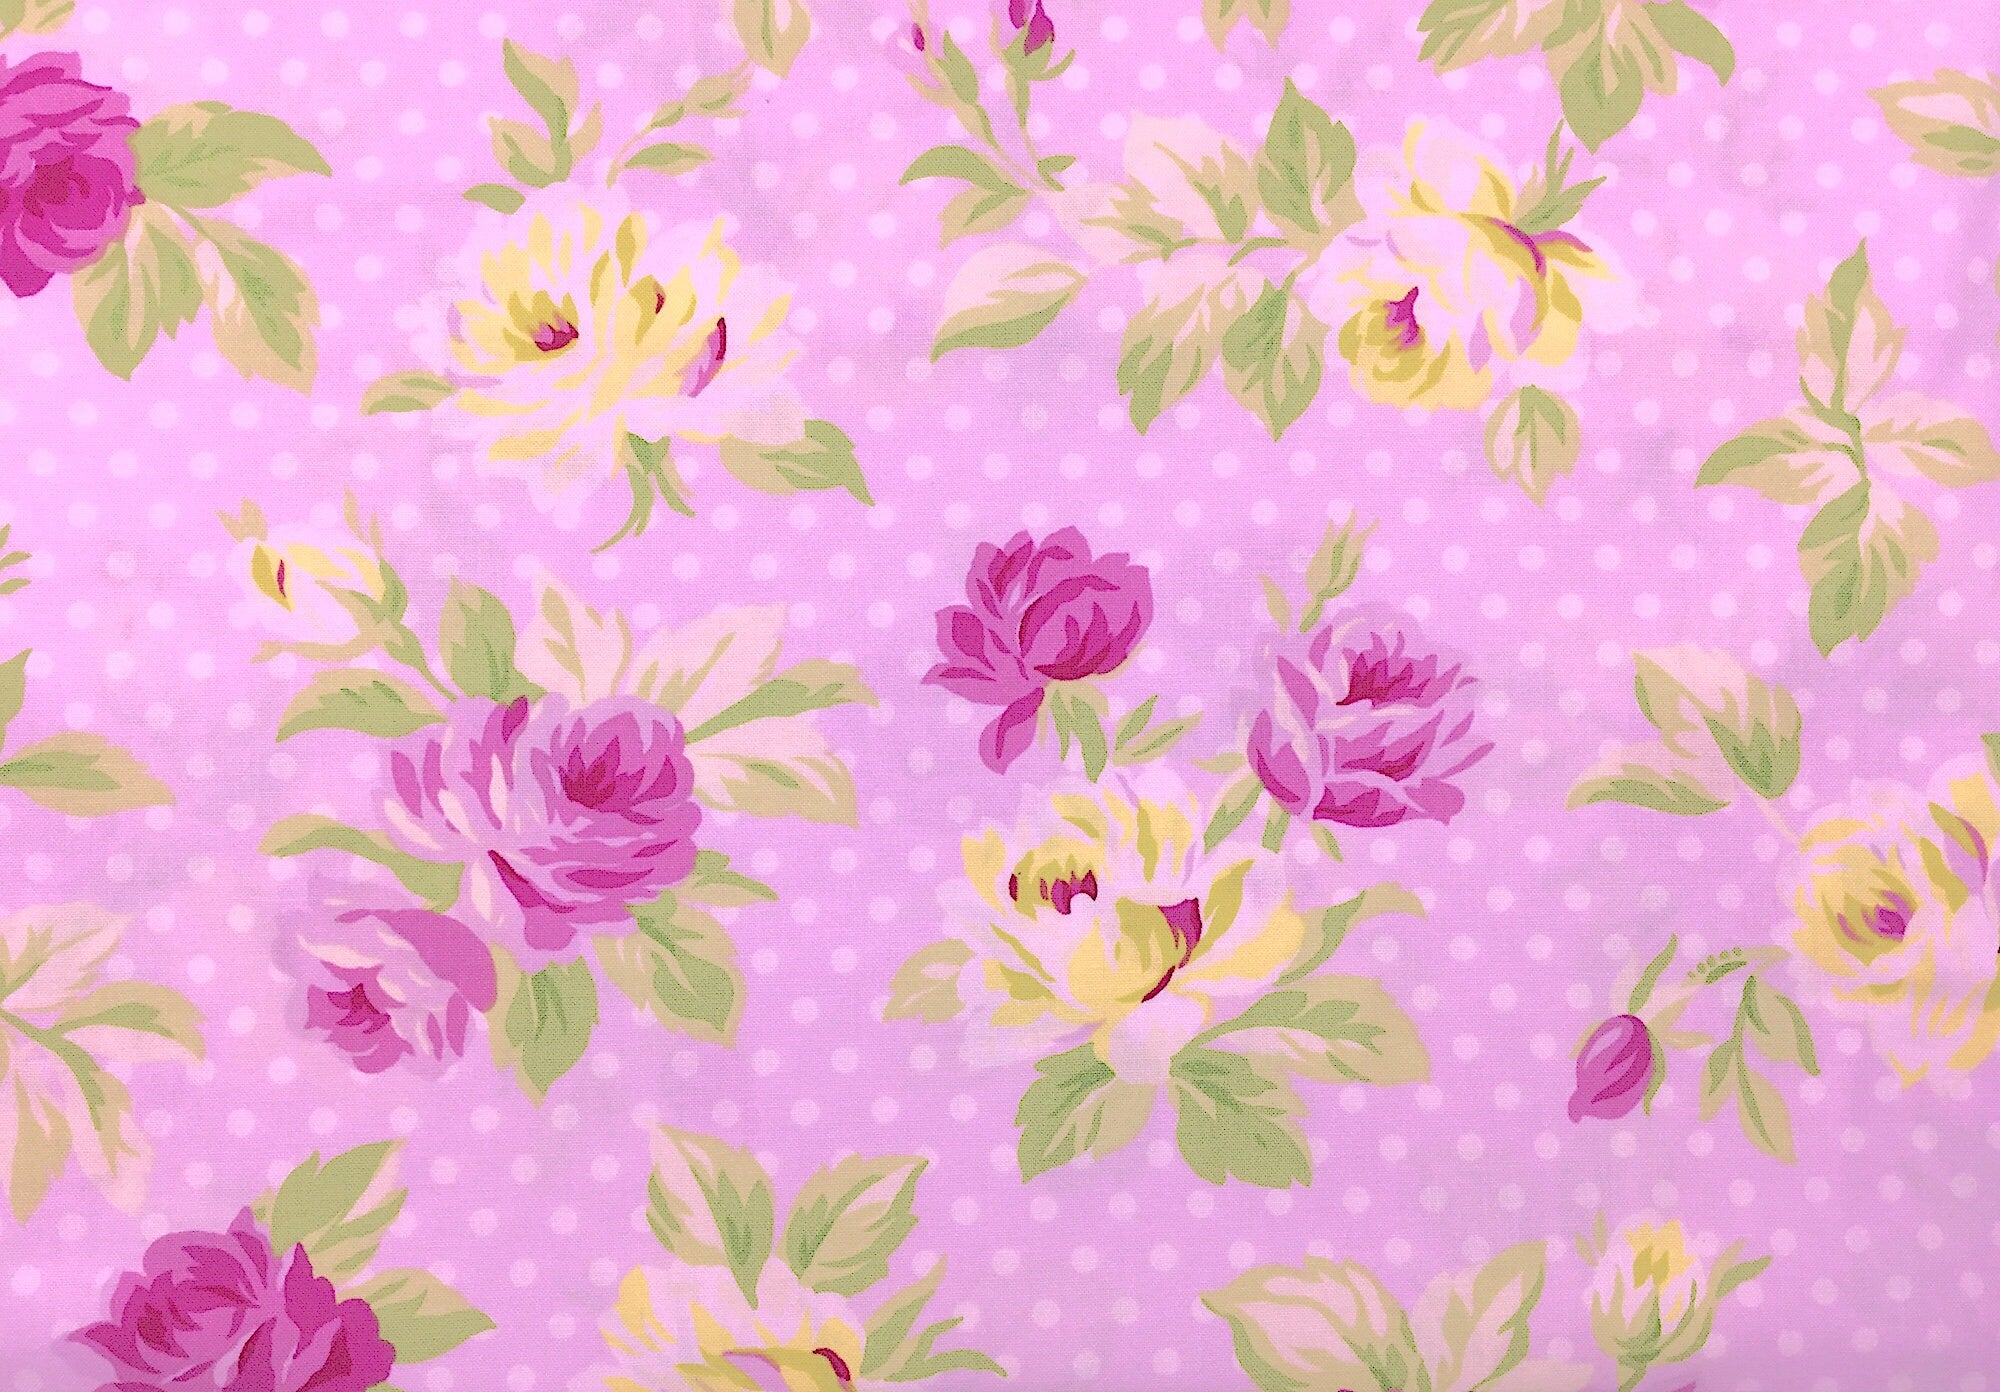 This fabric is called Sunshine and is covered with Pink and White Flowers The Background is pink with white dots.